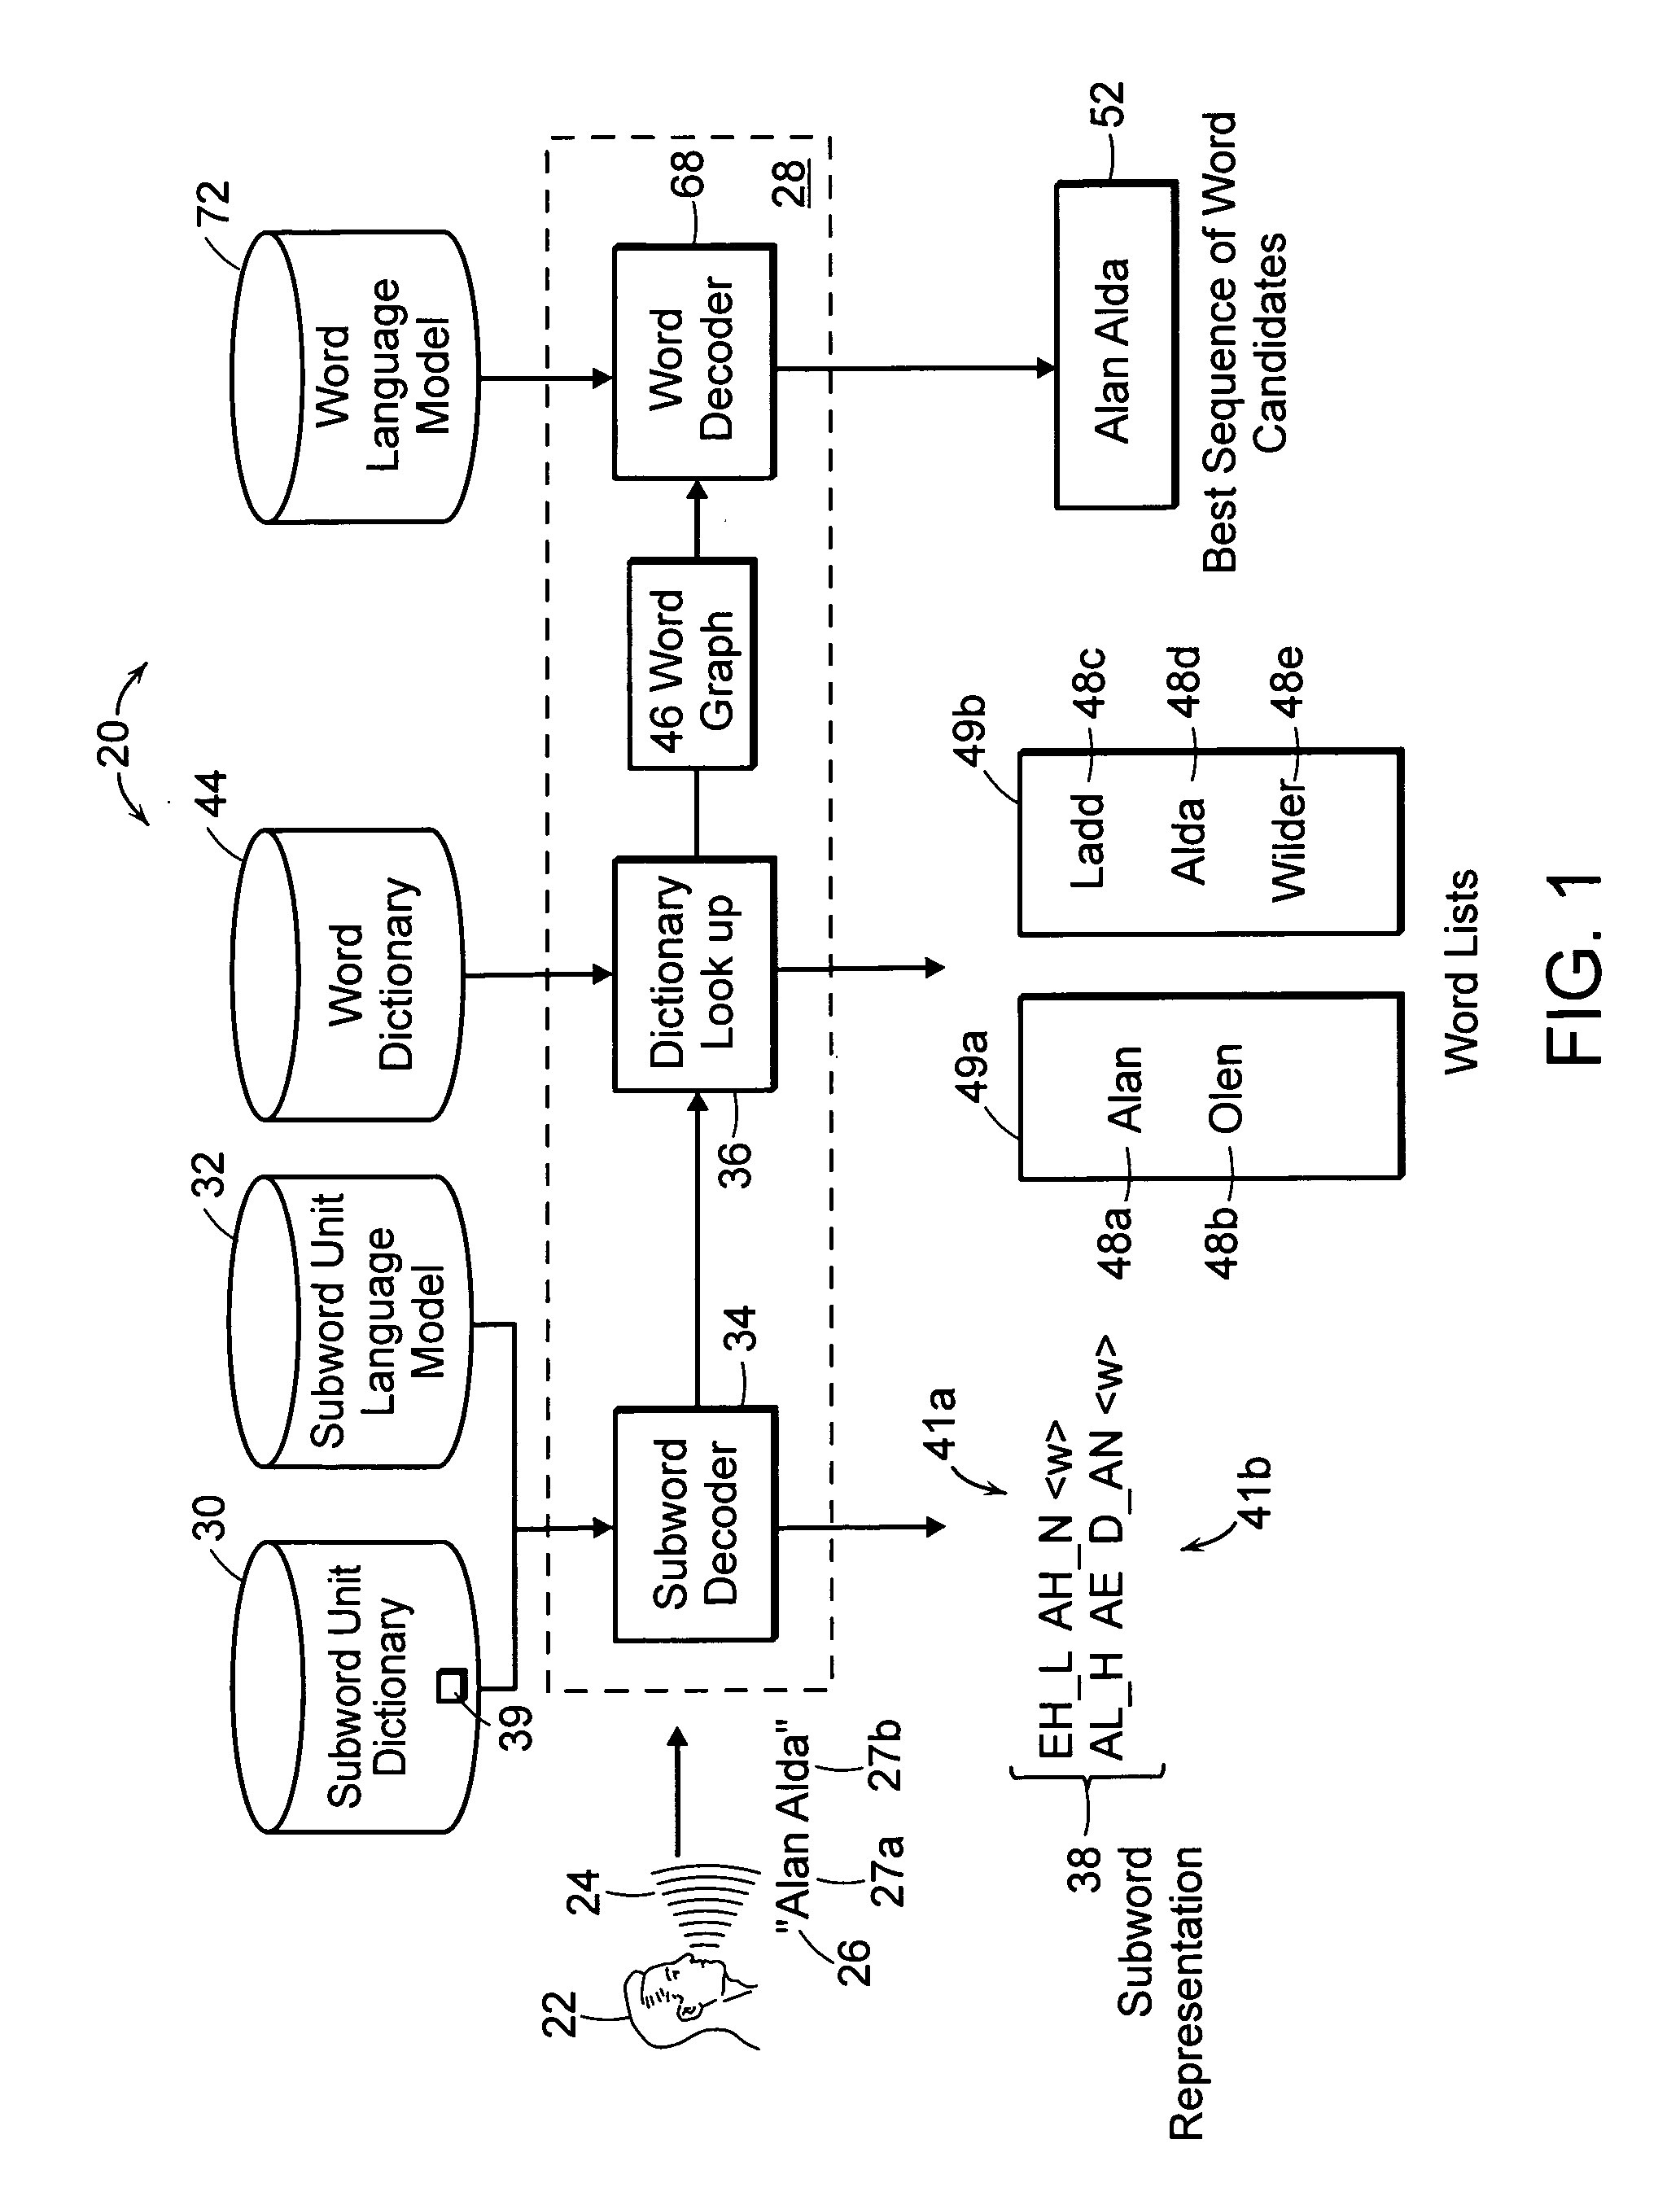 Vocabulary independent speech recognition system and method using subword units